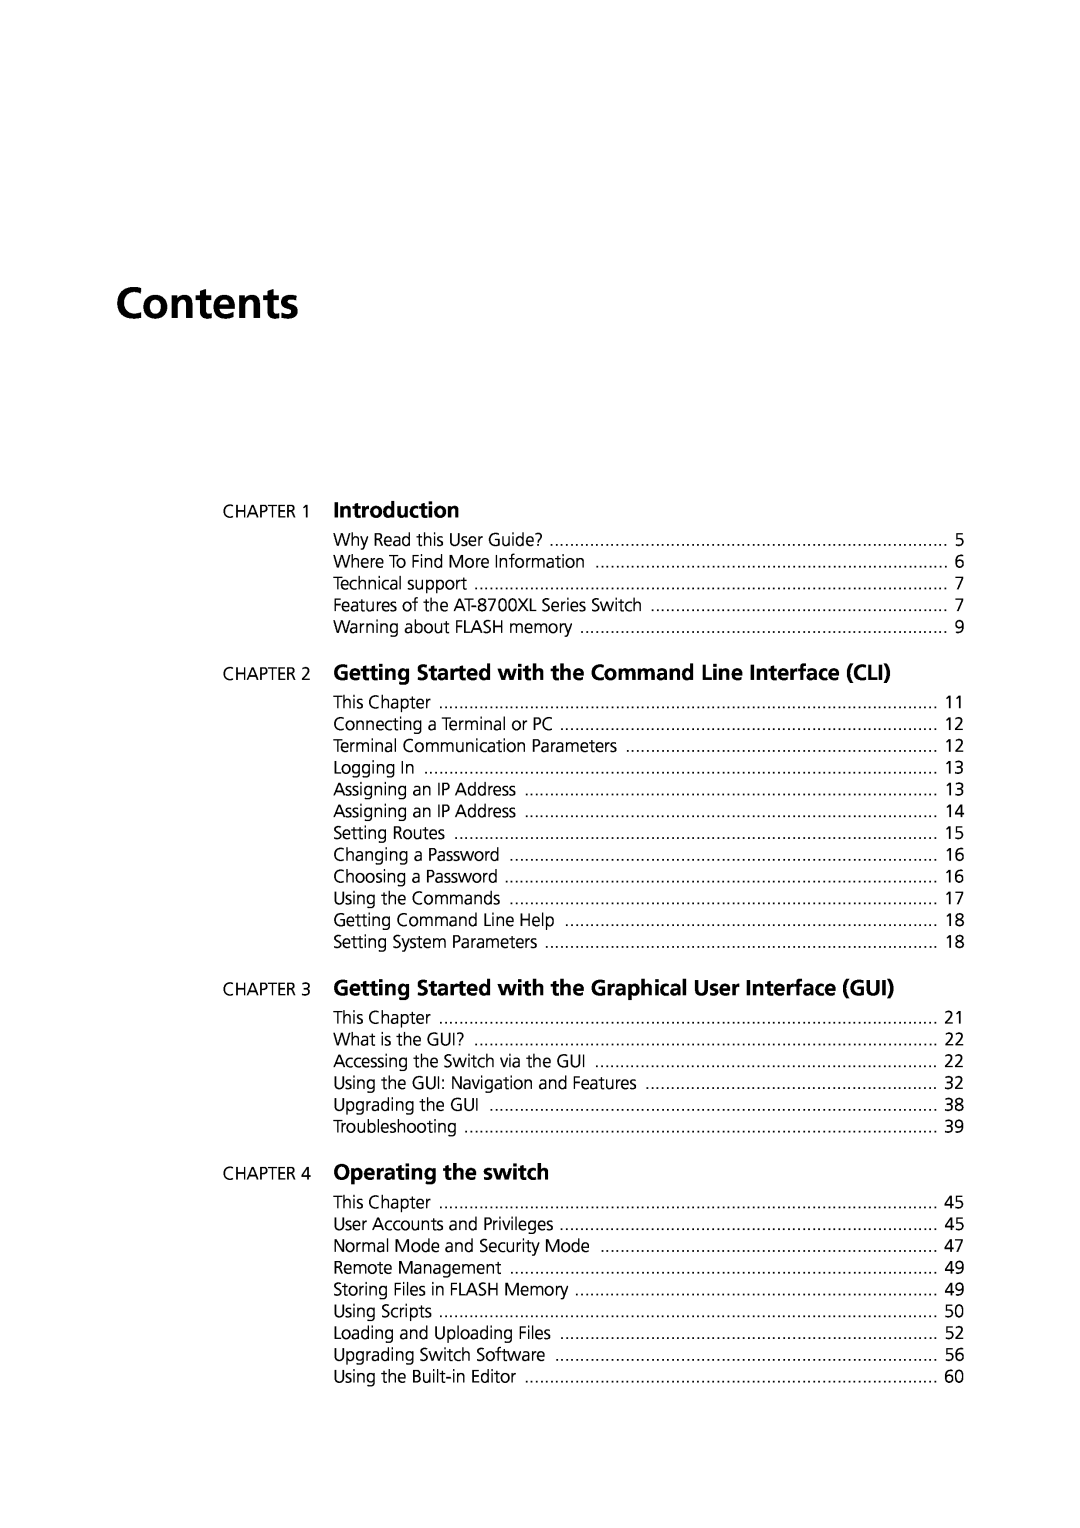 Allied Telesis at-8700xl series switch manual Contents, Introduction, Getting Started with the Command Line Interface CLI 